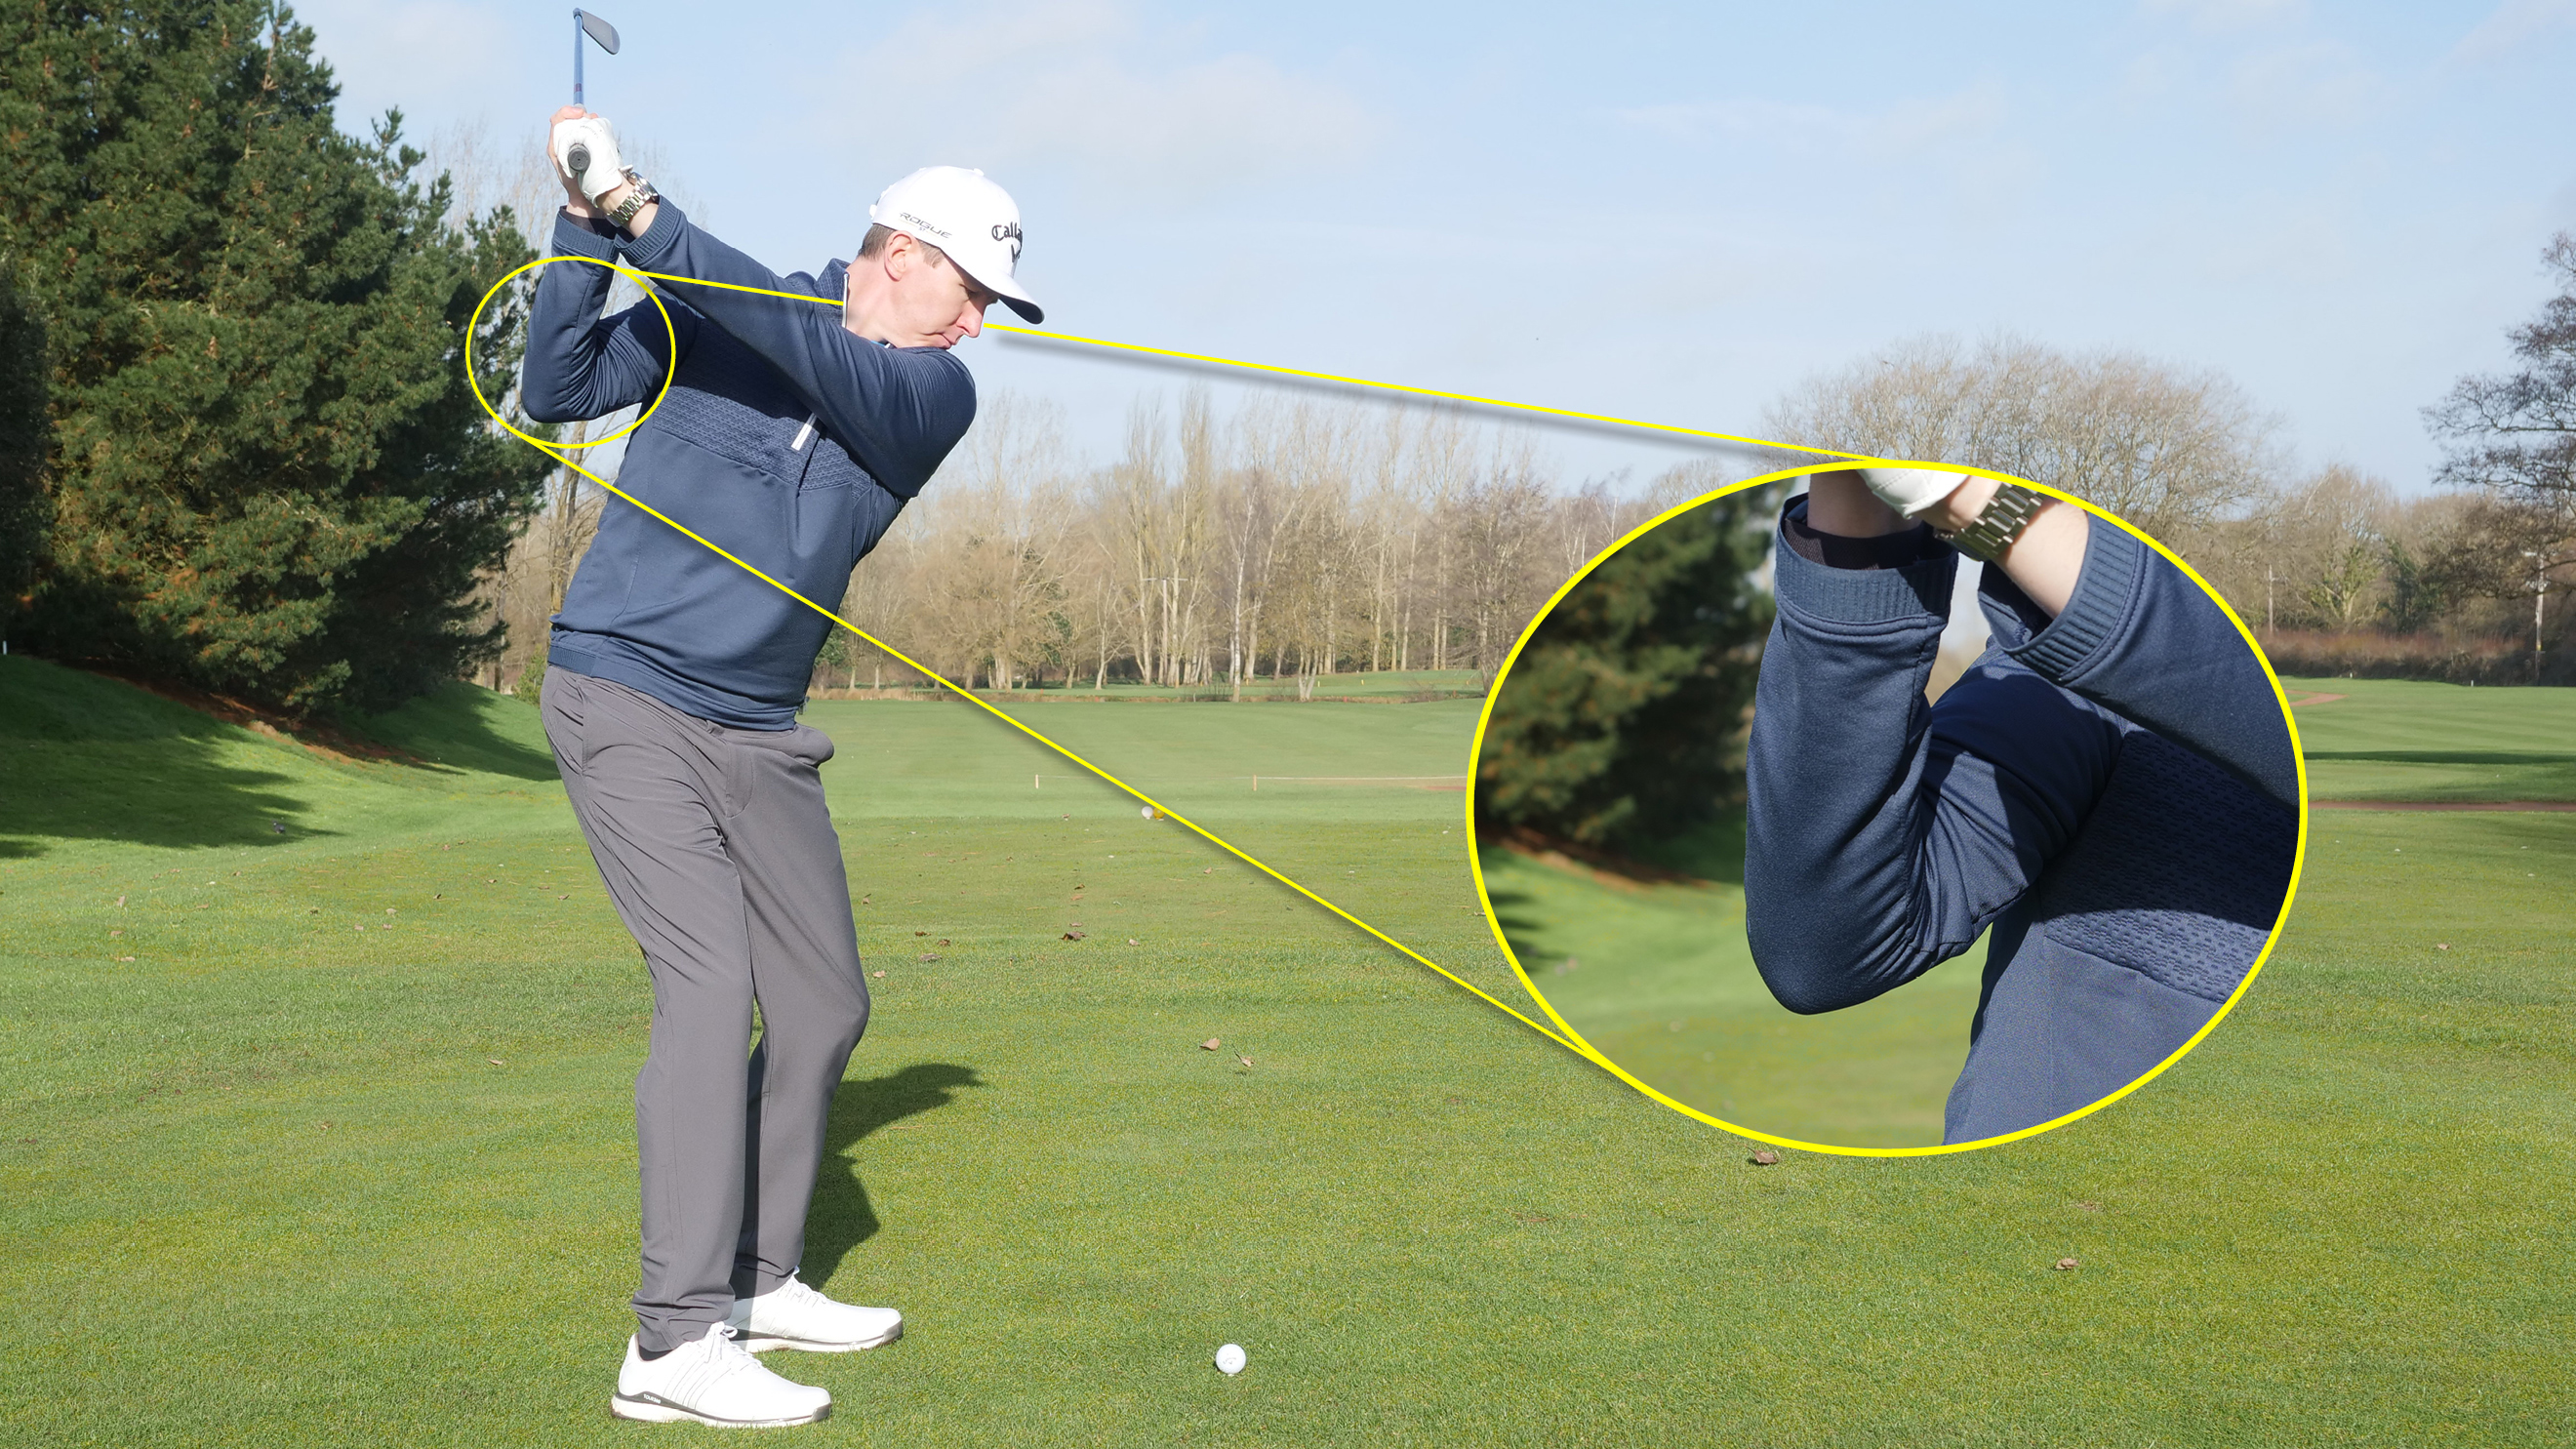 How to get the perfect impact position for your golf swing. Learn